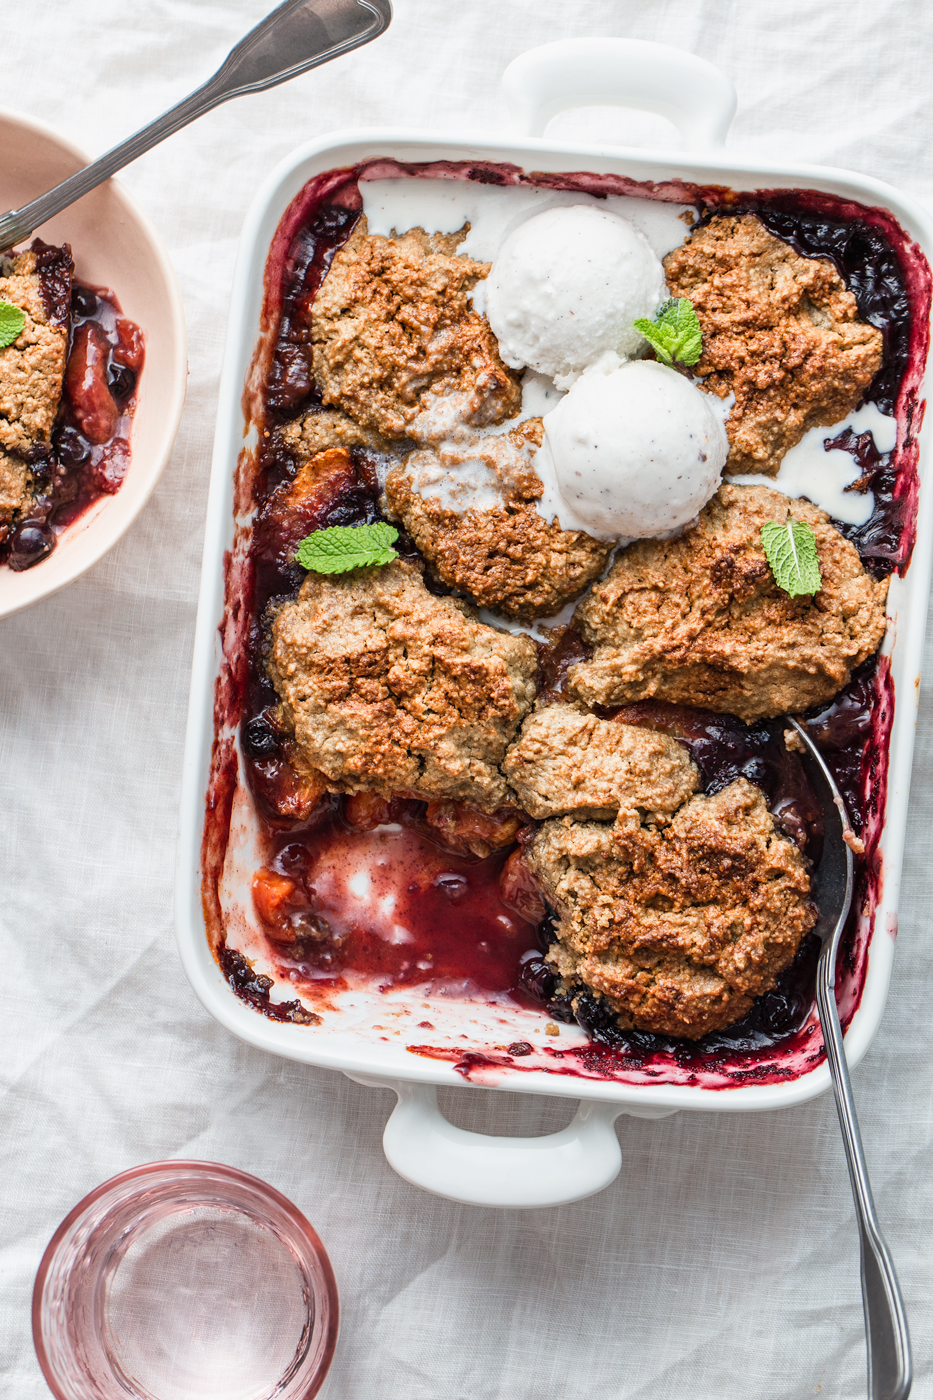 blueberry peach cobbler in a baking dish with ice cream food photography